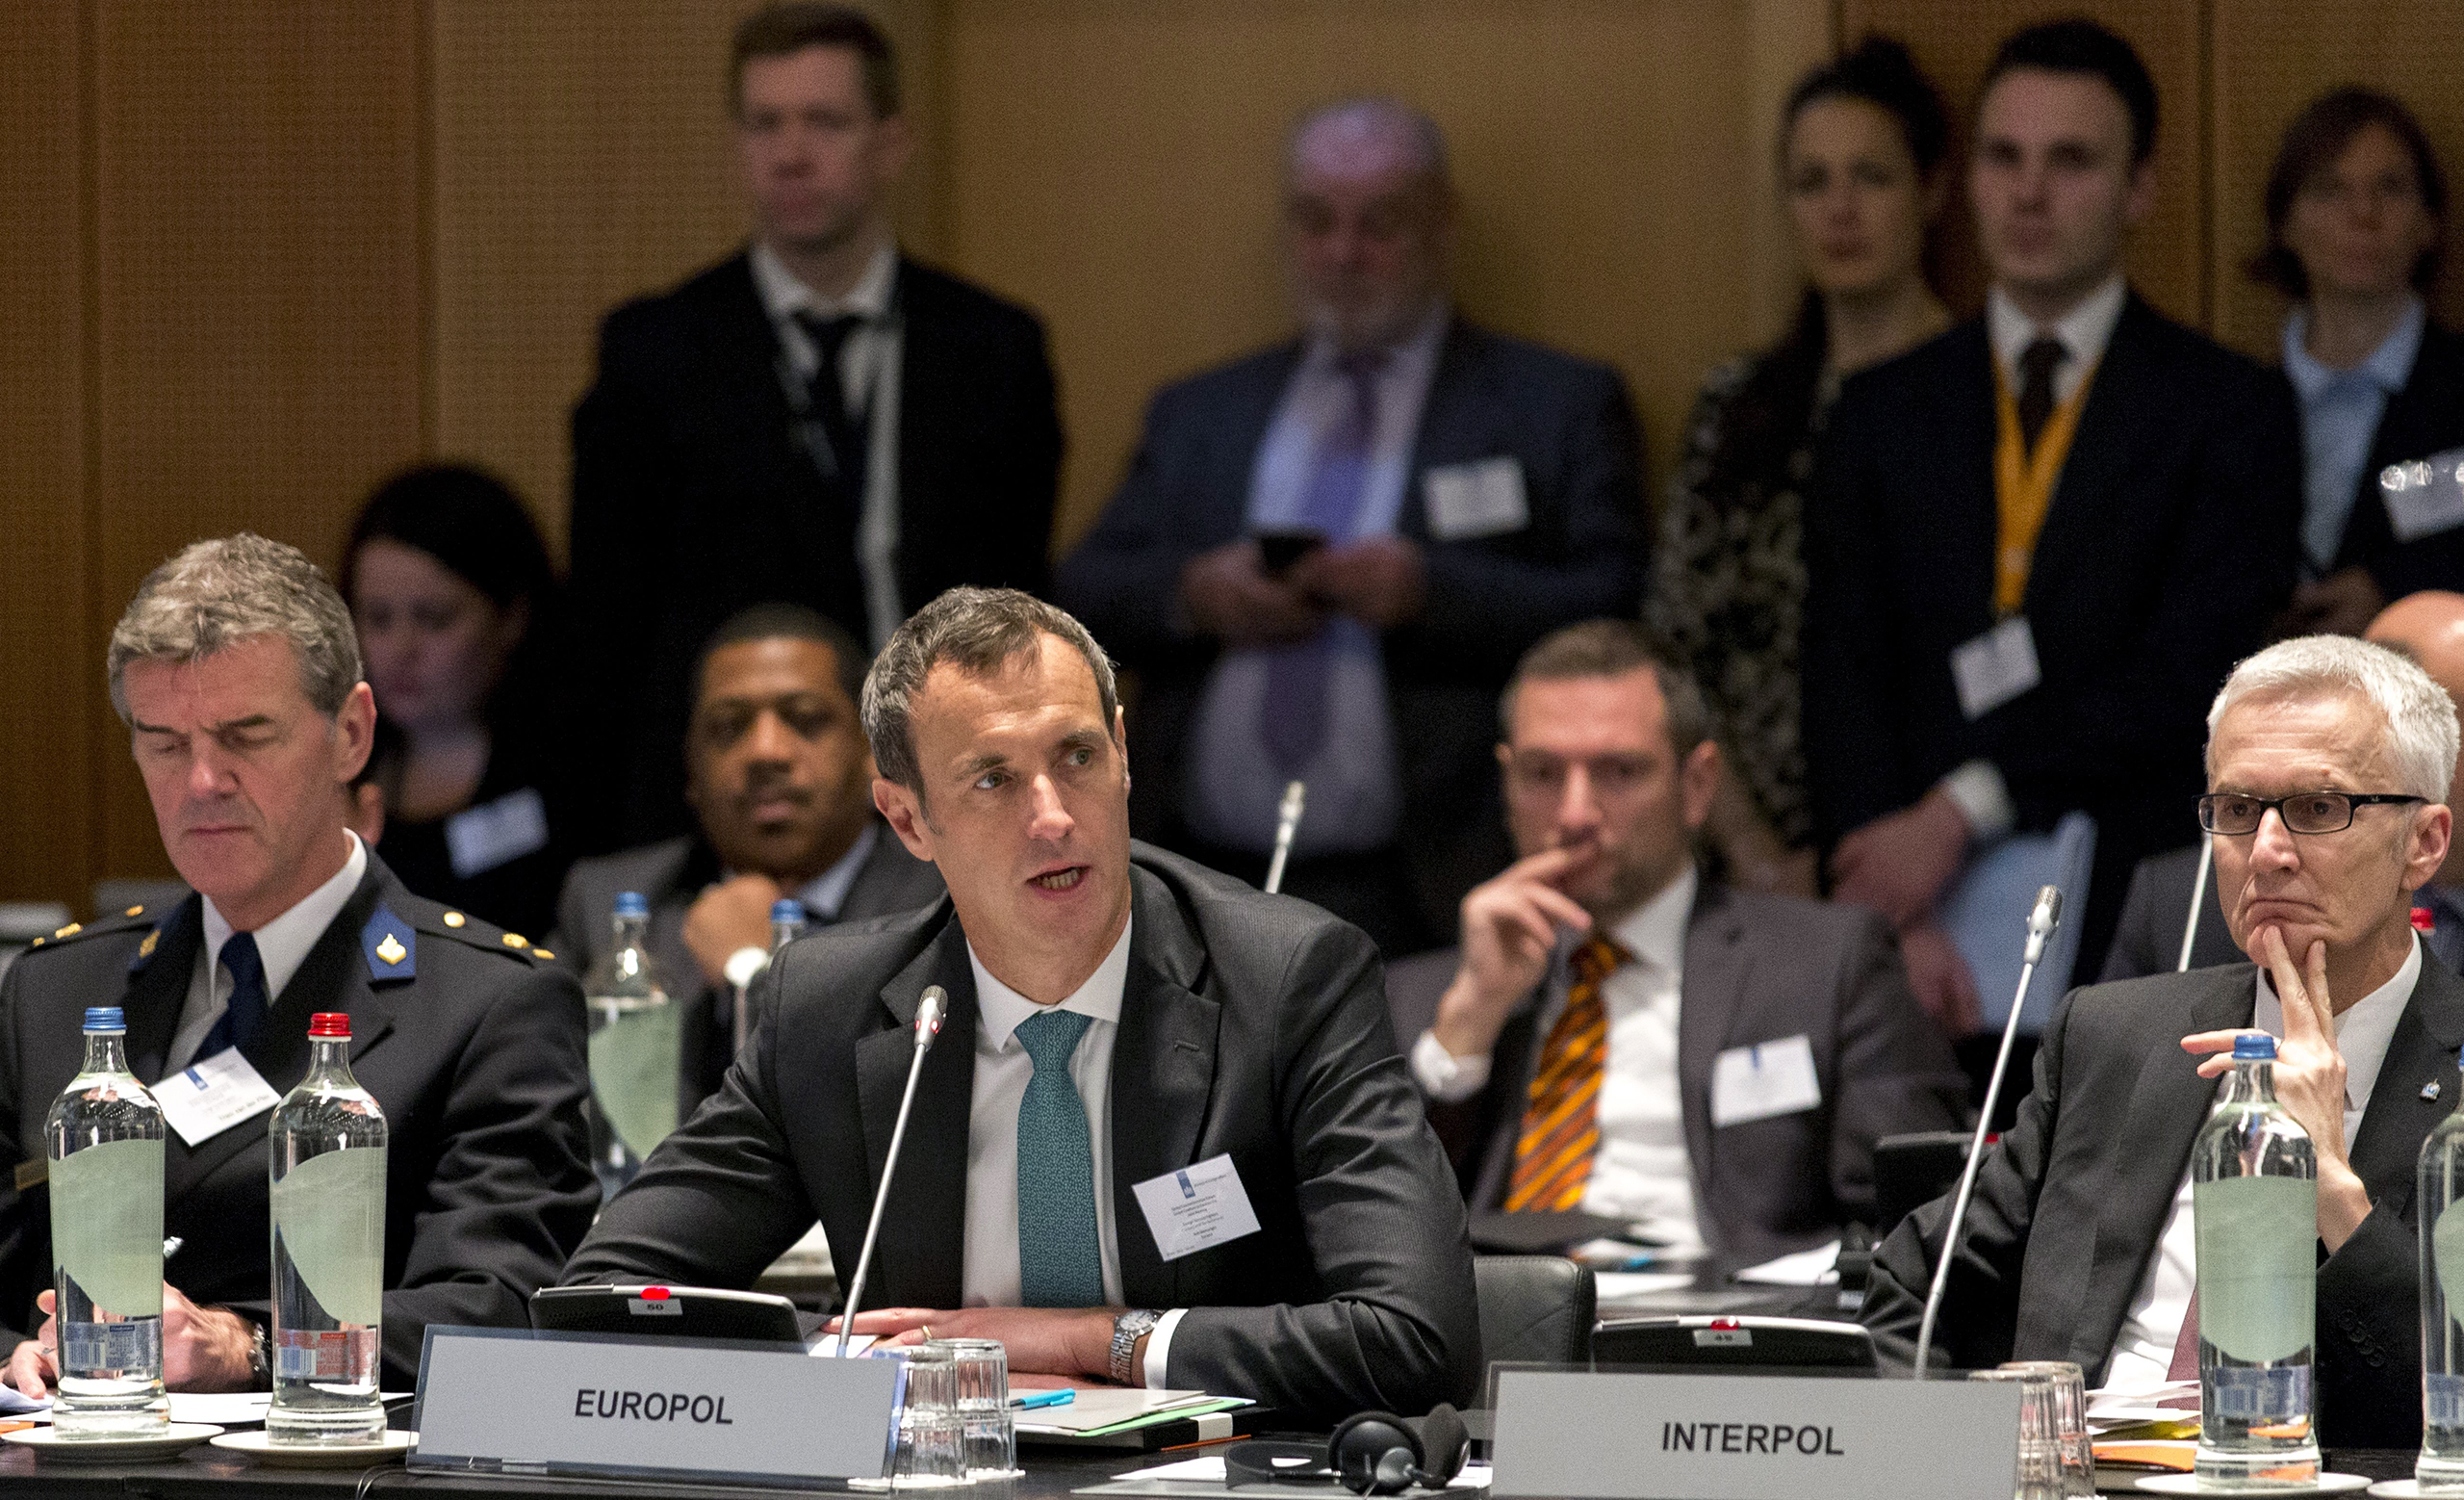 Europol Director Rob Wainwright speaks during the large international consultations with representatives of the Global Counterterrorism Forum and the anti-ISIS coalition in the fight against terror at the Europol headquarters in The Hague on Jan. 11, 2016. (Jerry Lampen—AFP/Getty Images)